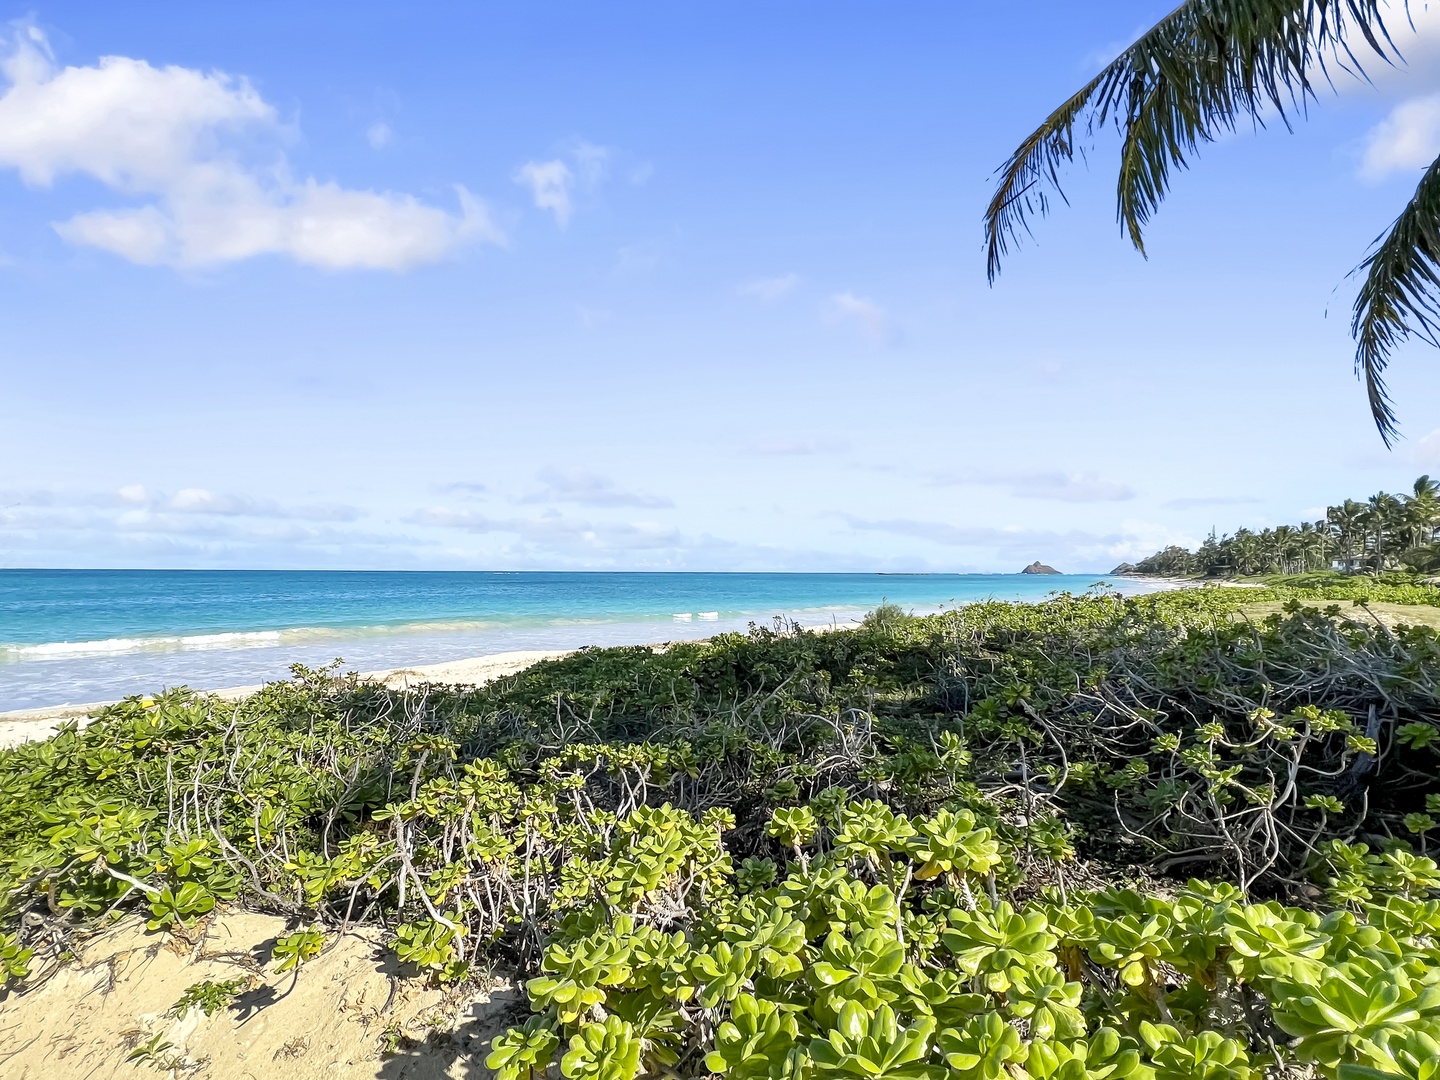 Kailua Vacation Rentals, Kai Mele - Enjoy early morning walks on the beach from your front door!